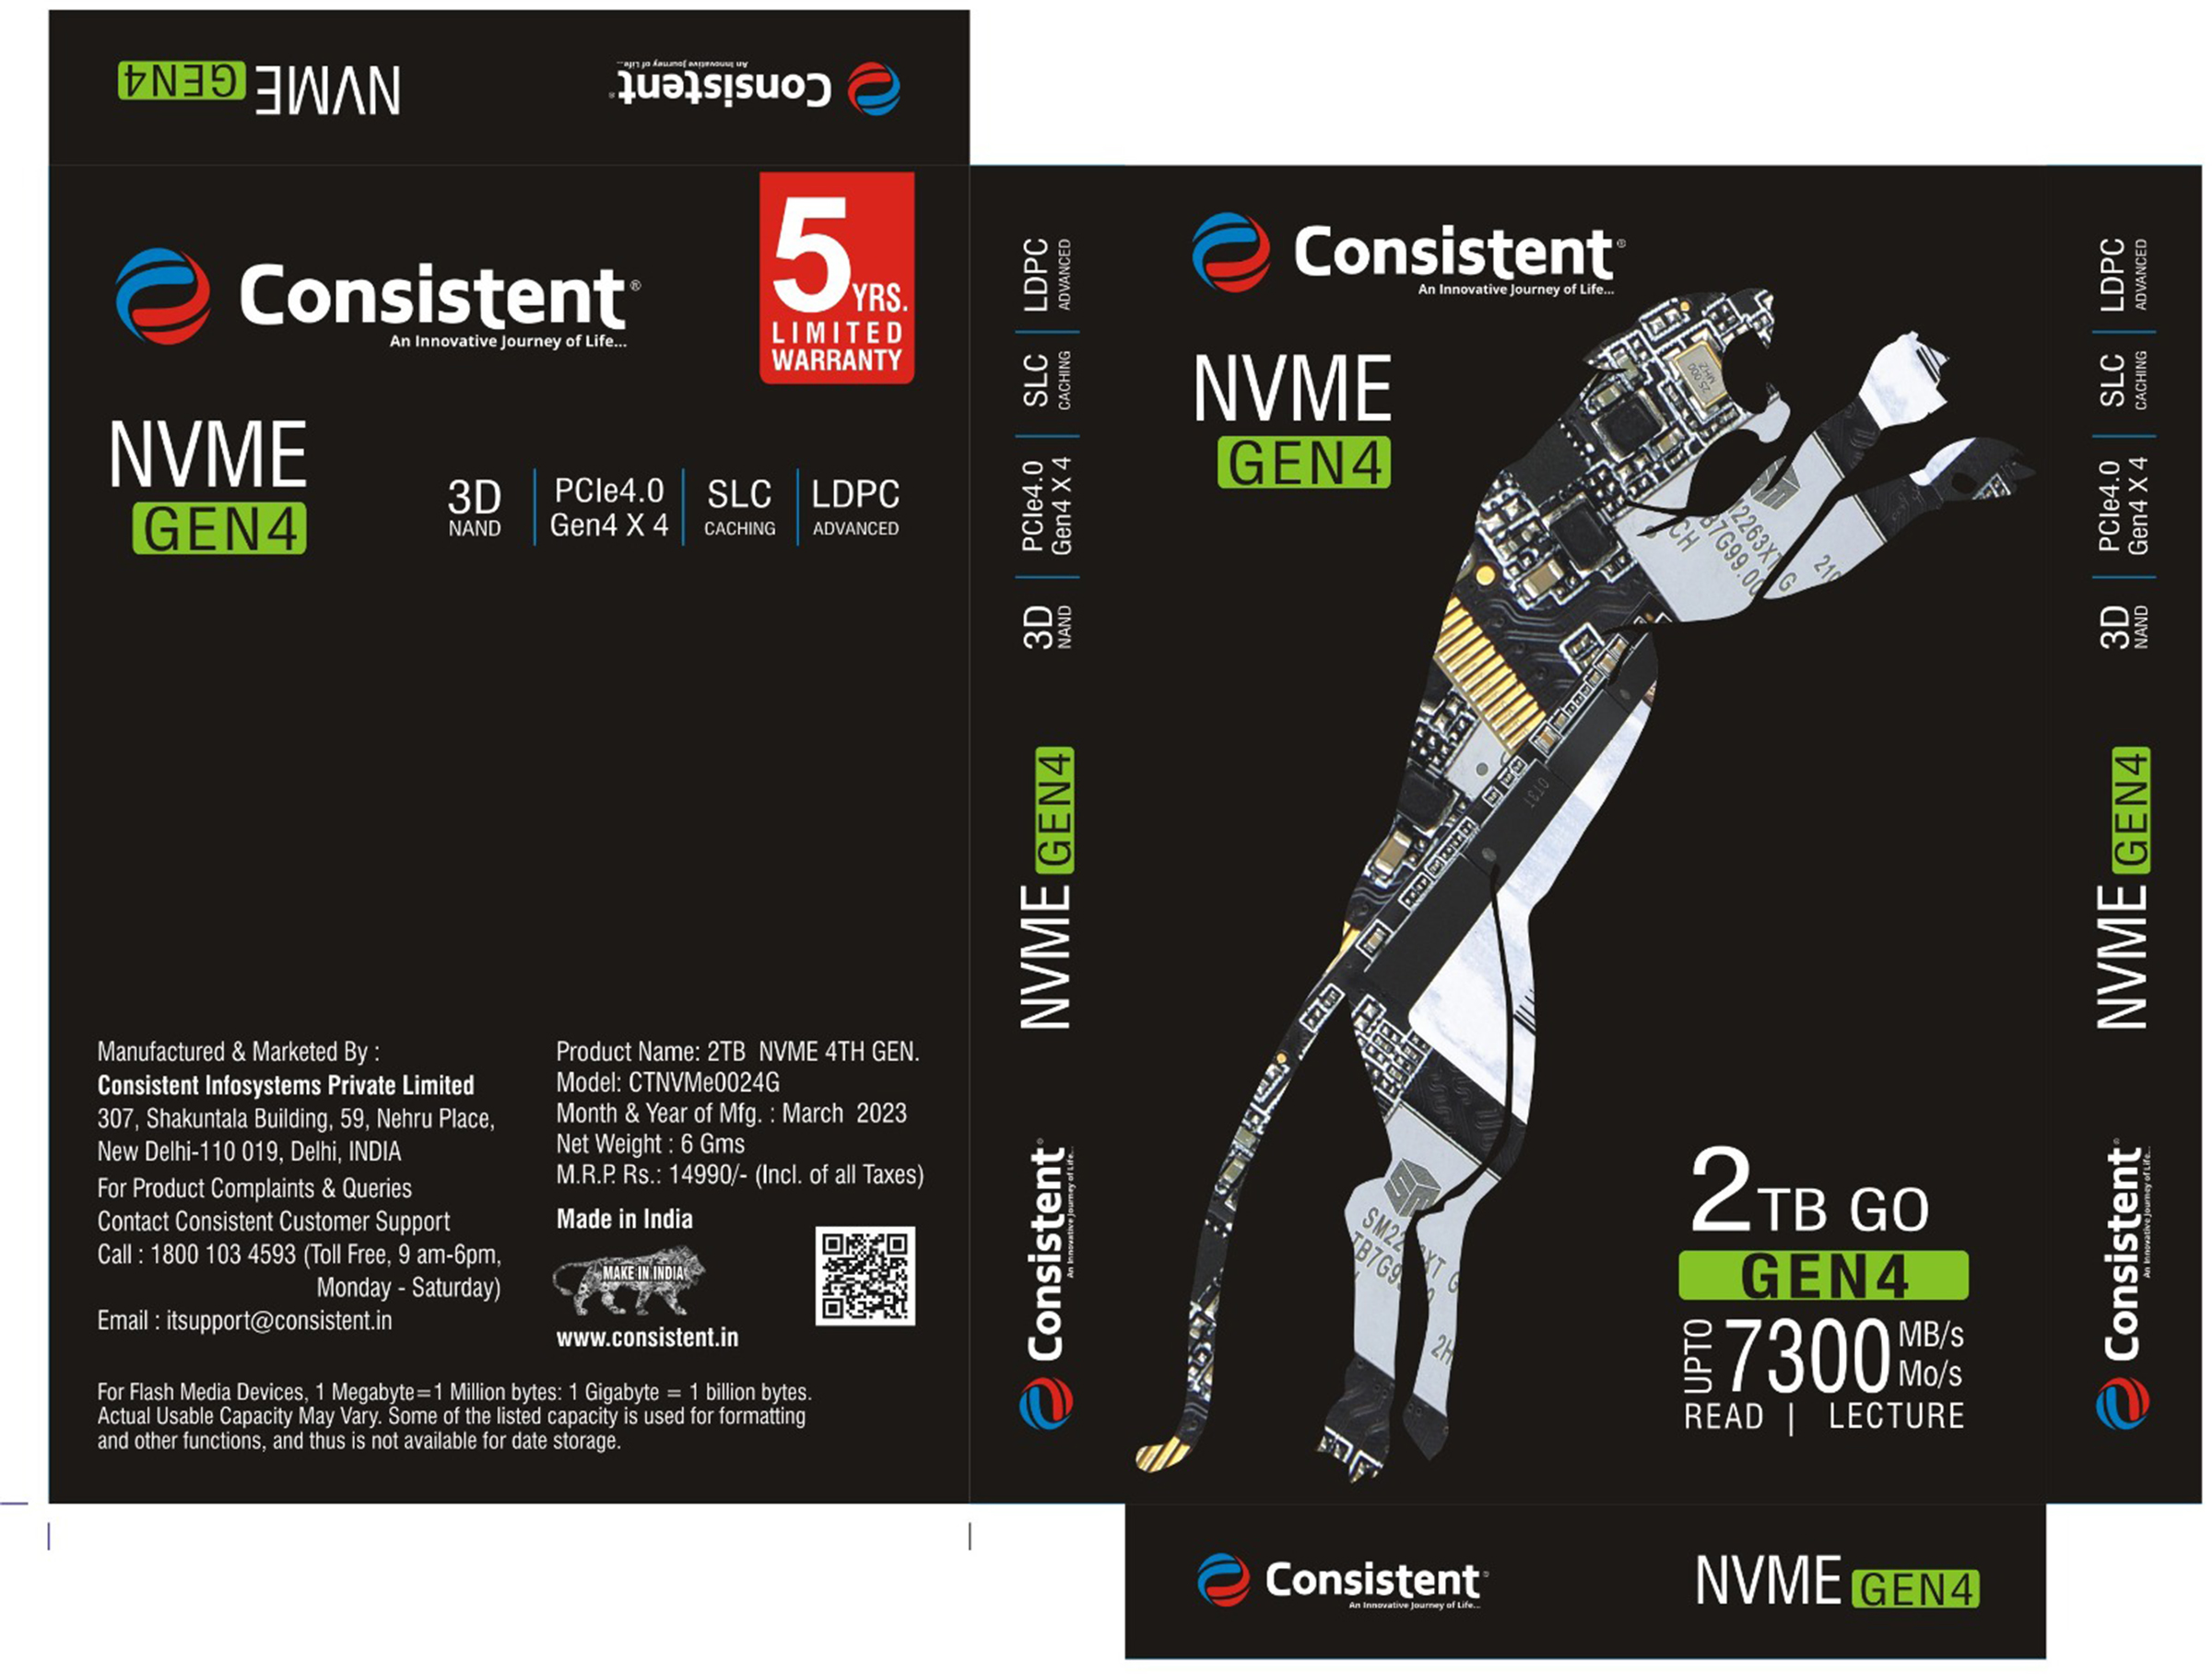 Consistent New NVMe Gen 4 2 TB Launched at Convergence India 2023